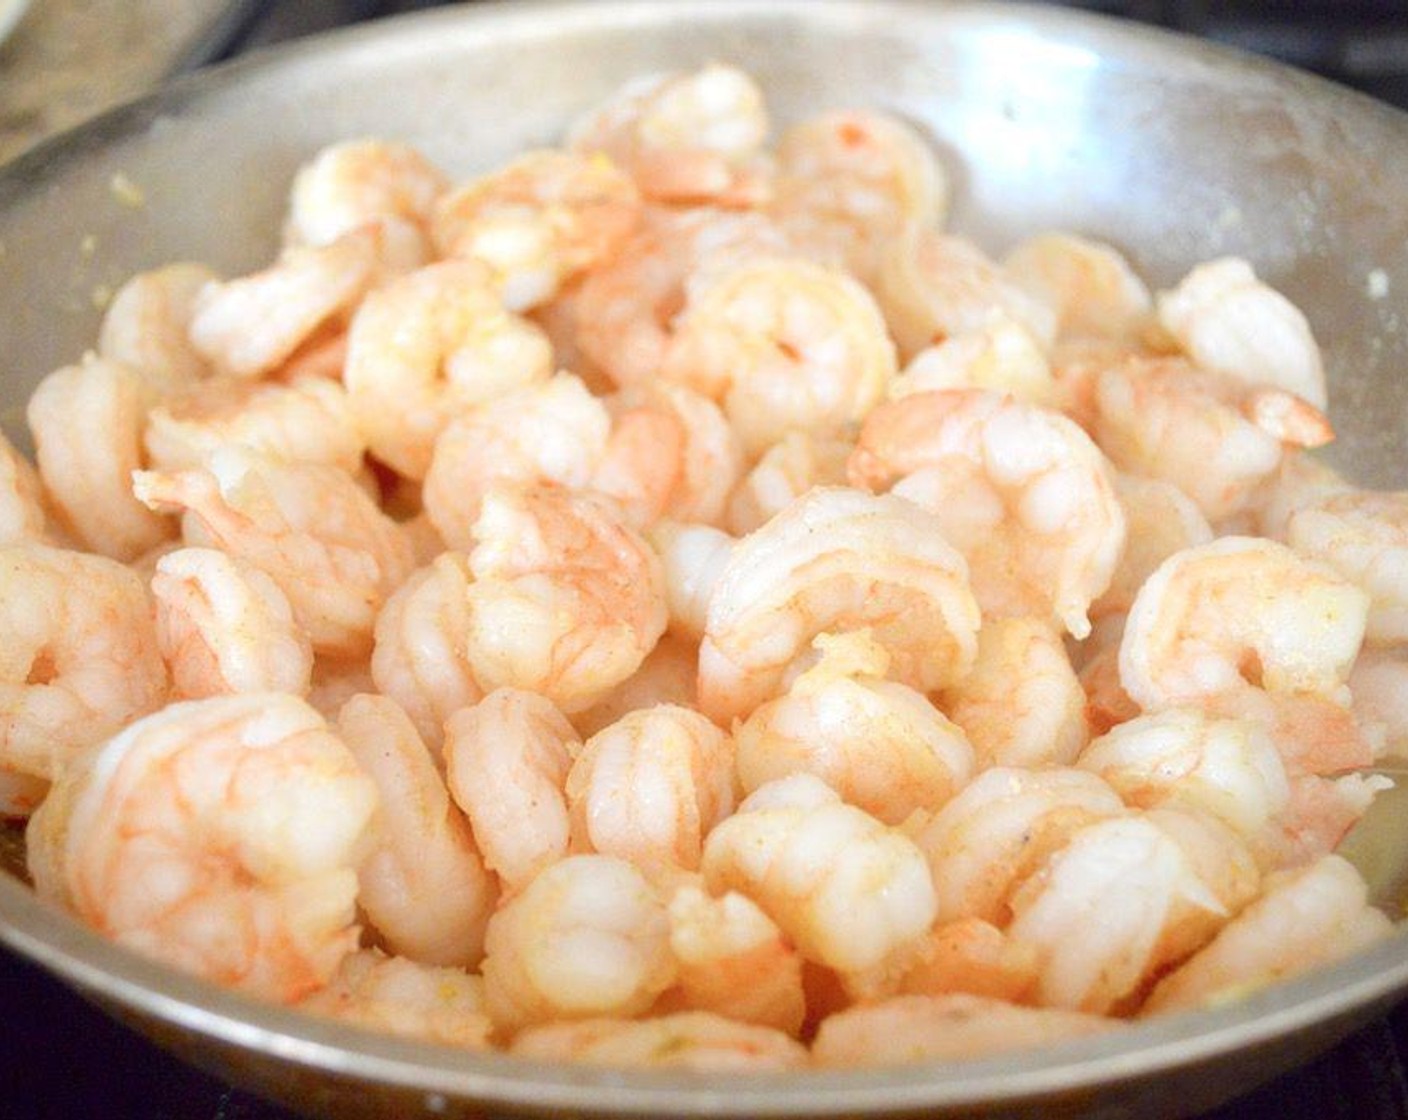 step 2 Then add the Large Shrimp (2 lb) and cook it until it is pink and opaque, for about 5 minutes. While it cooks, flavor it with the Salt (1 pinch), McCormick® Garlic Powder (1/2 tsp), Dried Onions (1/2 tsp), and Ground Cumin (1/4 tsp). Once it is cooked through, set it aside to cool.